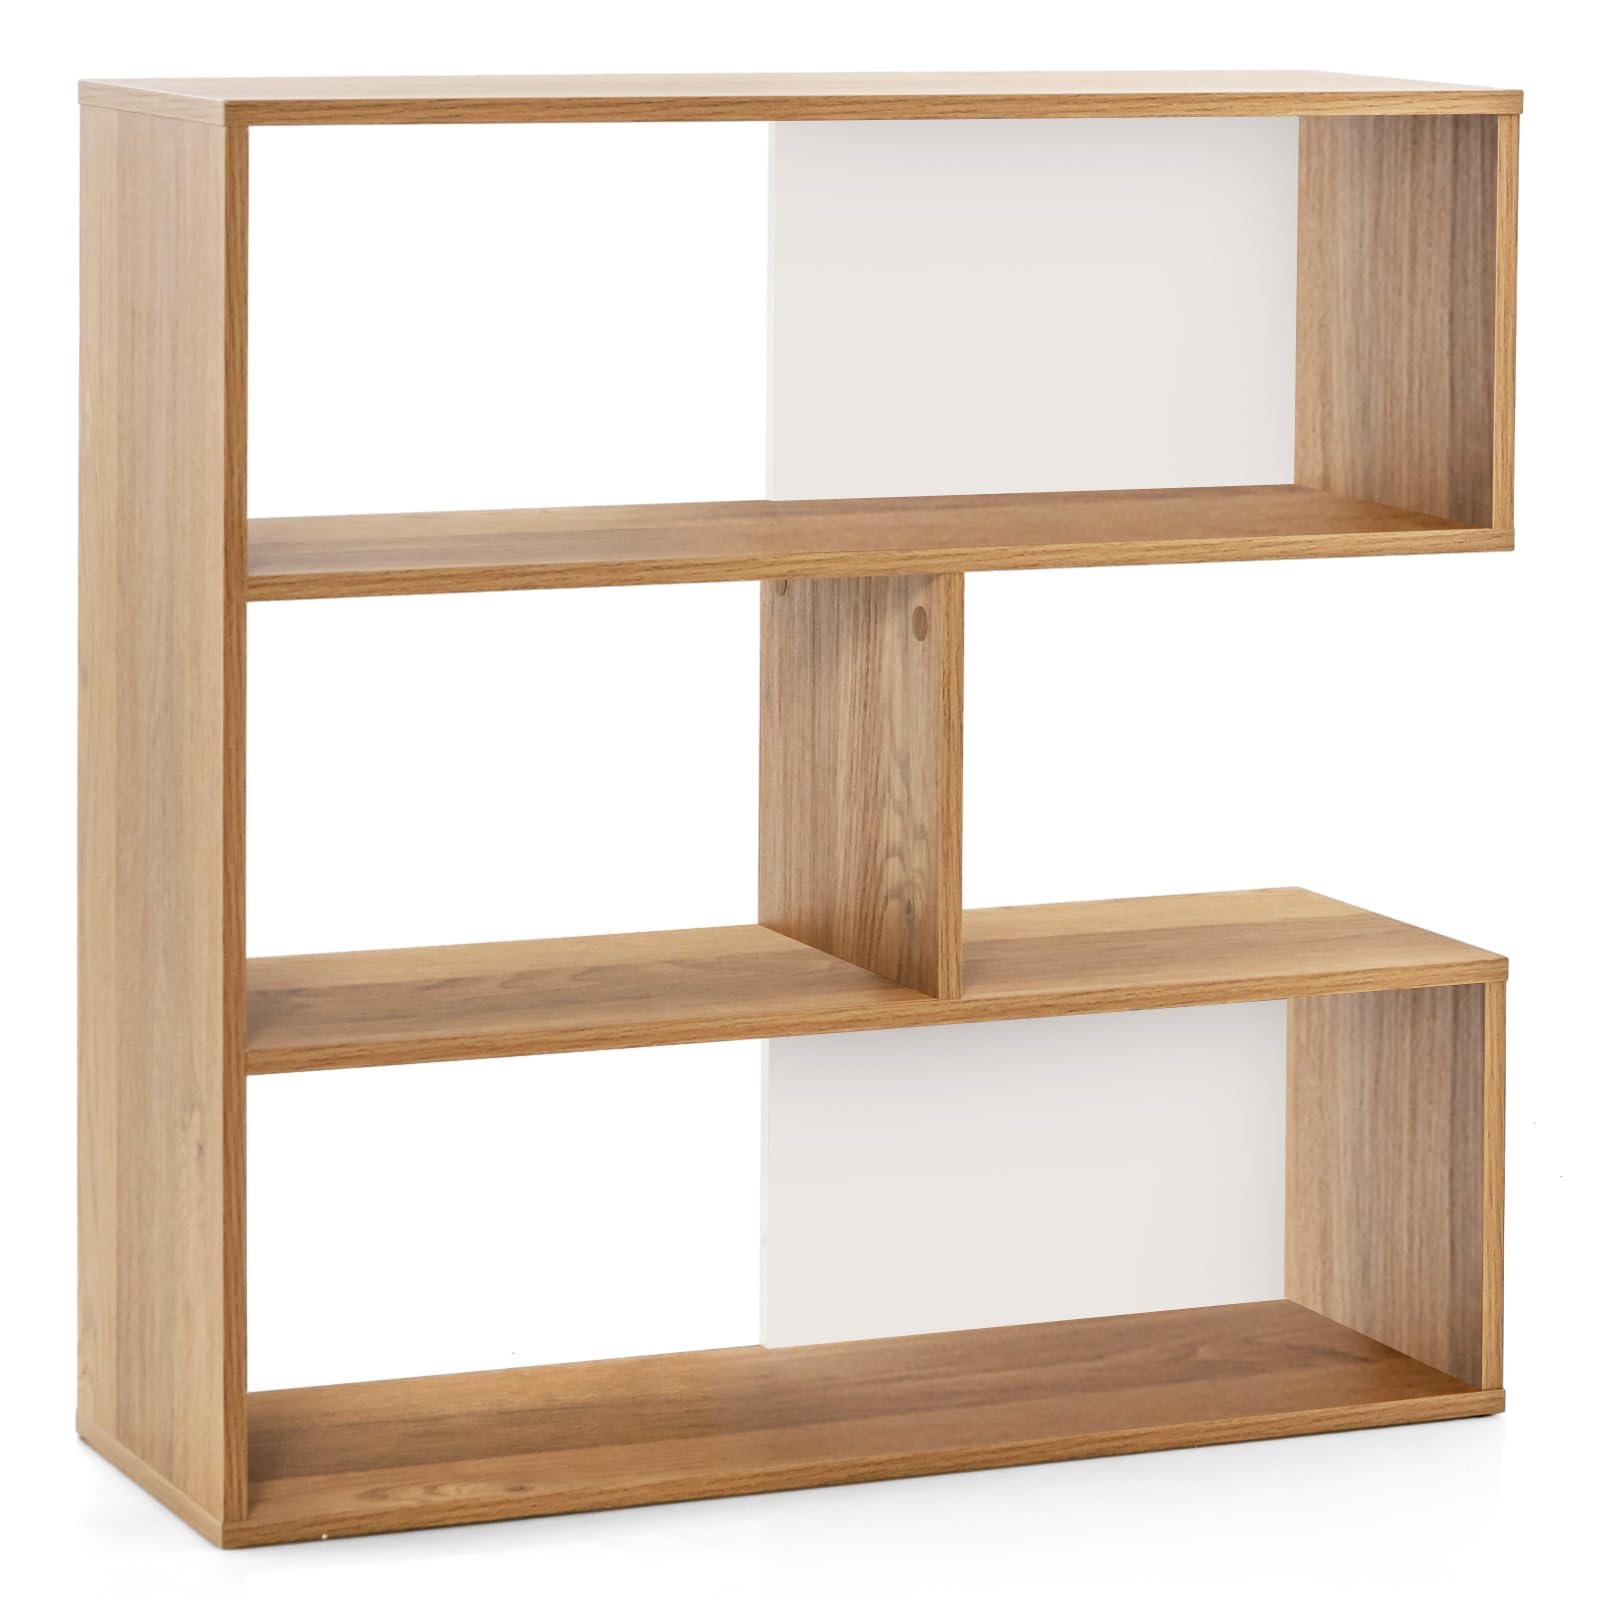 Giantex 3-Tier Bookshelf, Wooden Concave Bookcase for Small Space, Modern Freestanding Display Storage Shelves